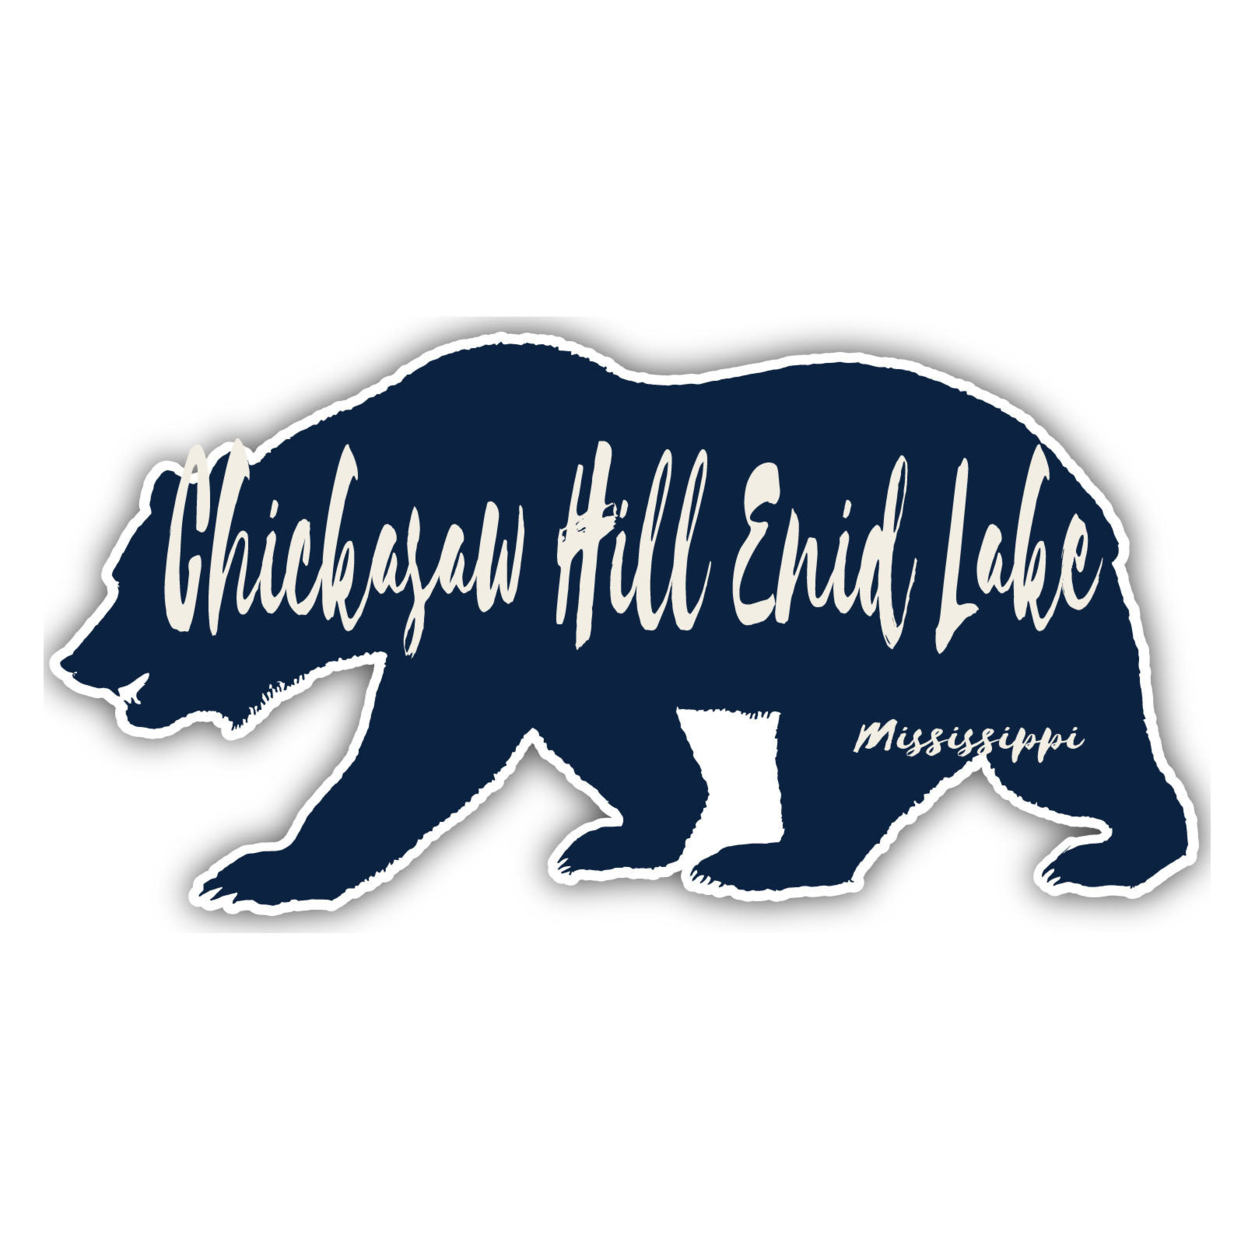 Chickasaw Hill Enid Lake Mississippi Souvenir Decorative Stickers (Choose Theme And Size) - Single Unit, 12-Inch, Bear